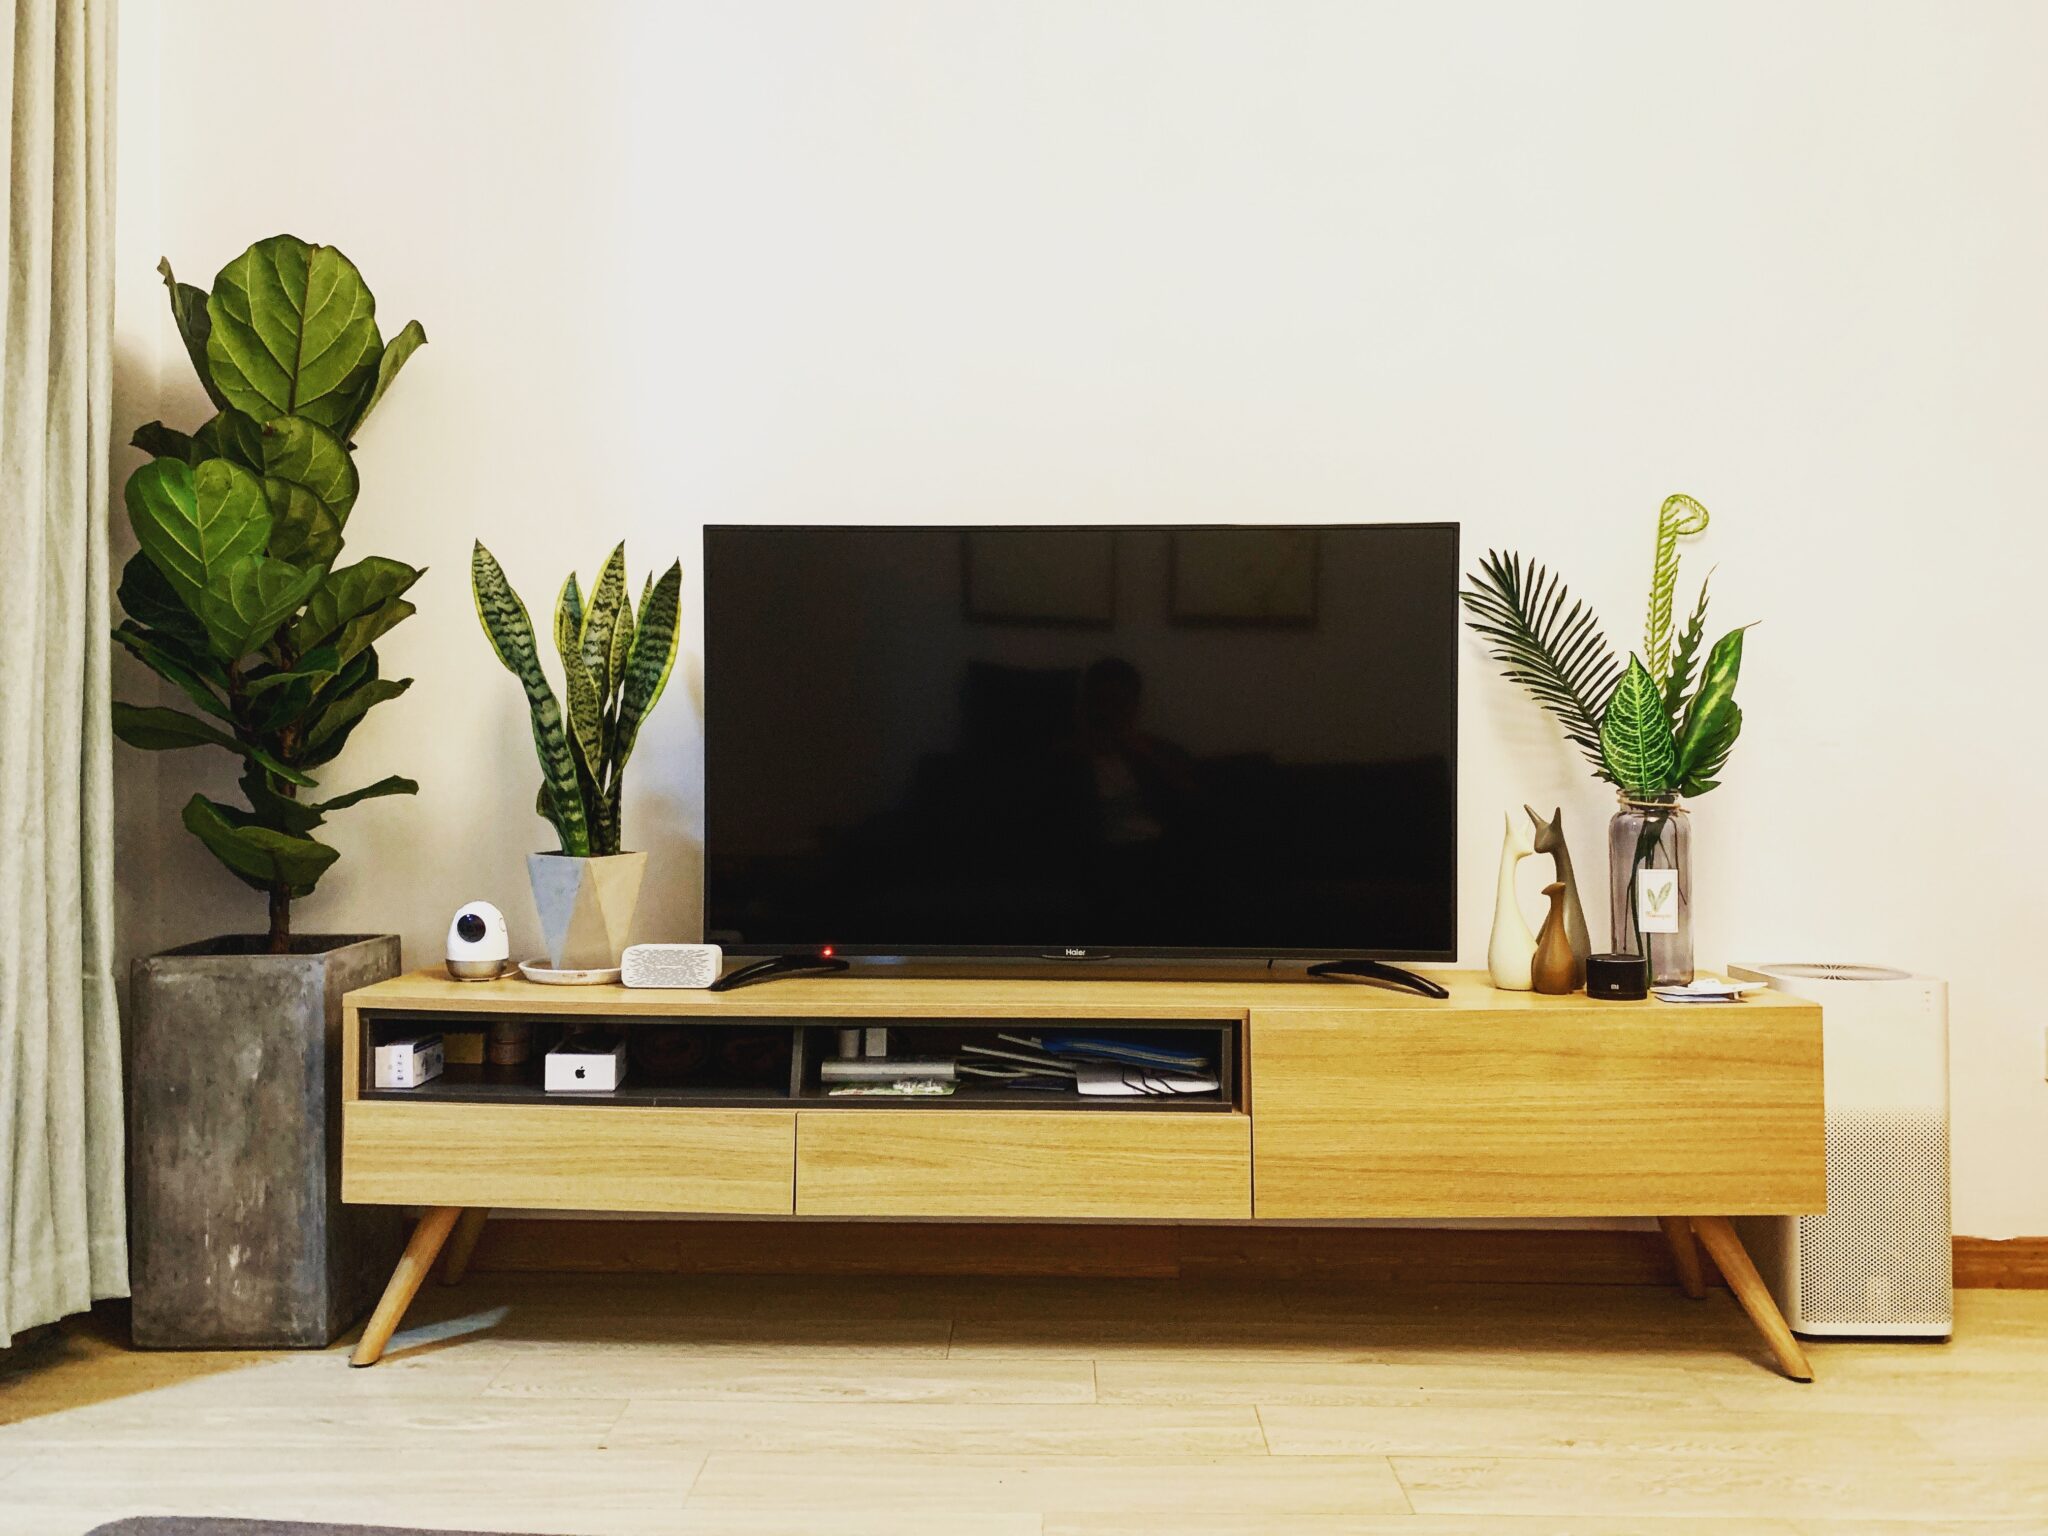 TV Stand picture for show